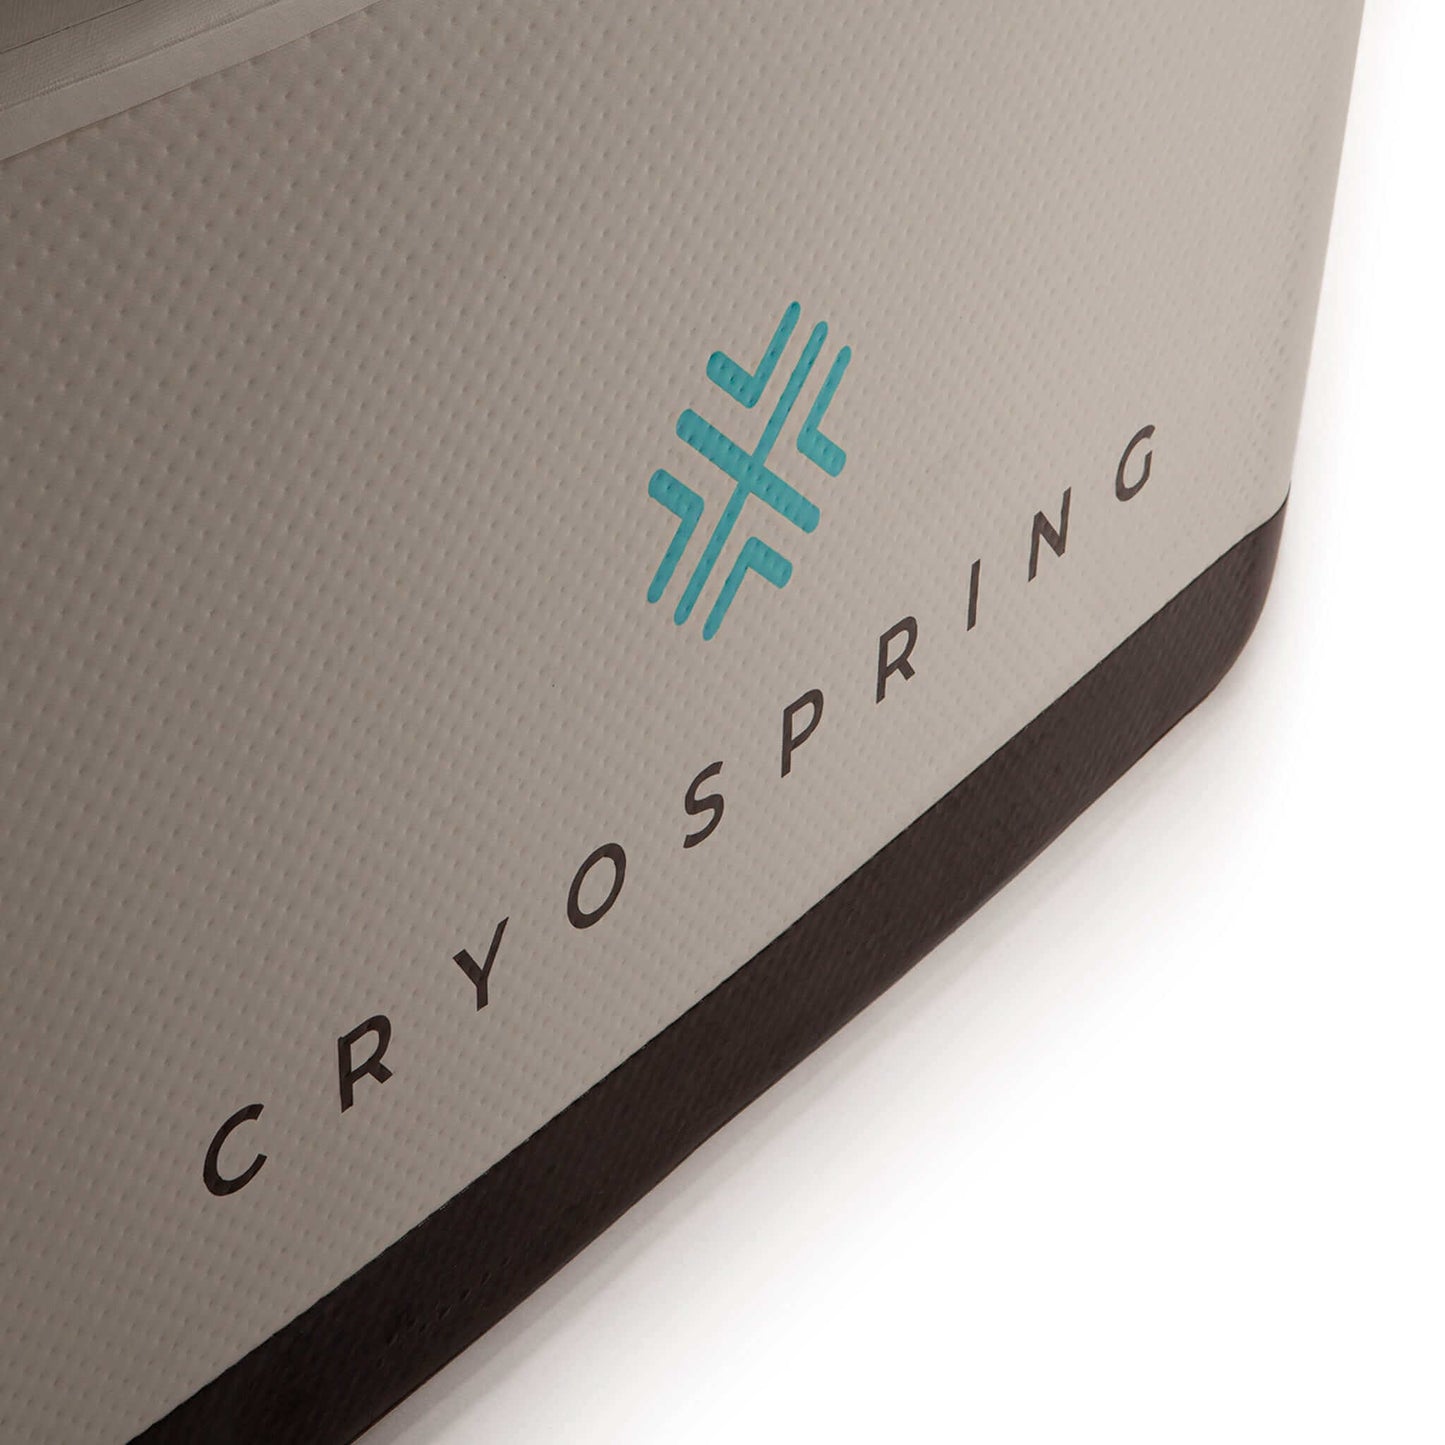  Cryospring Portable Ice Bath by Cryospring sold by Pilates Matters® by BSP LLC